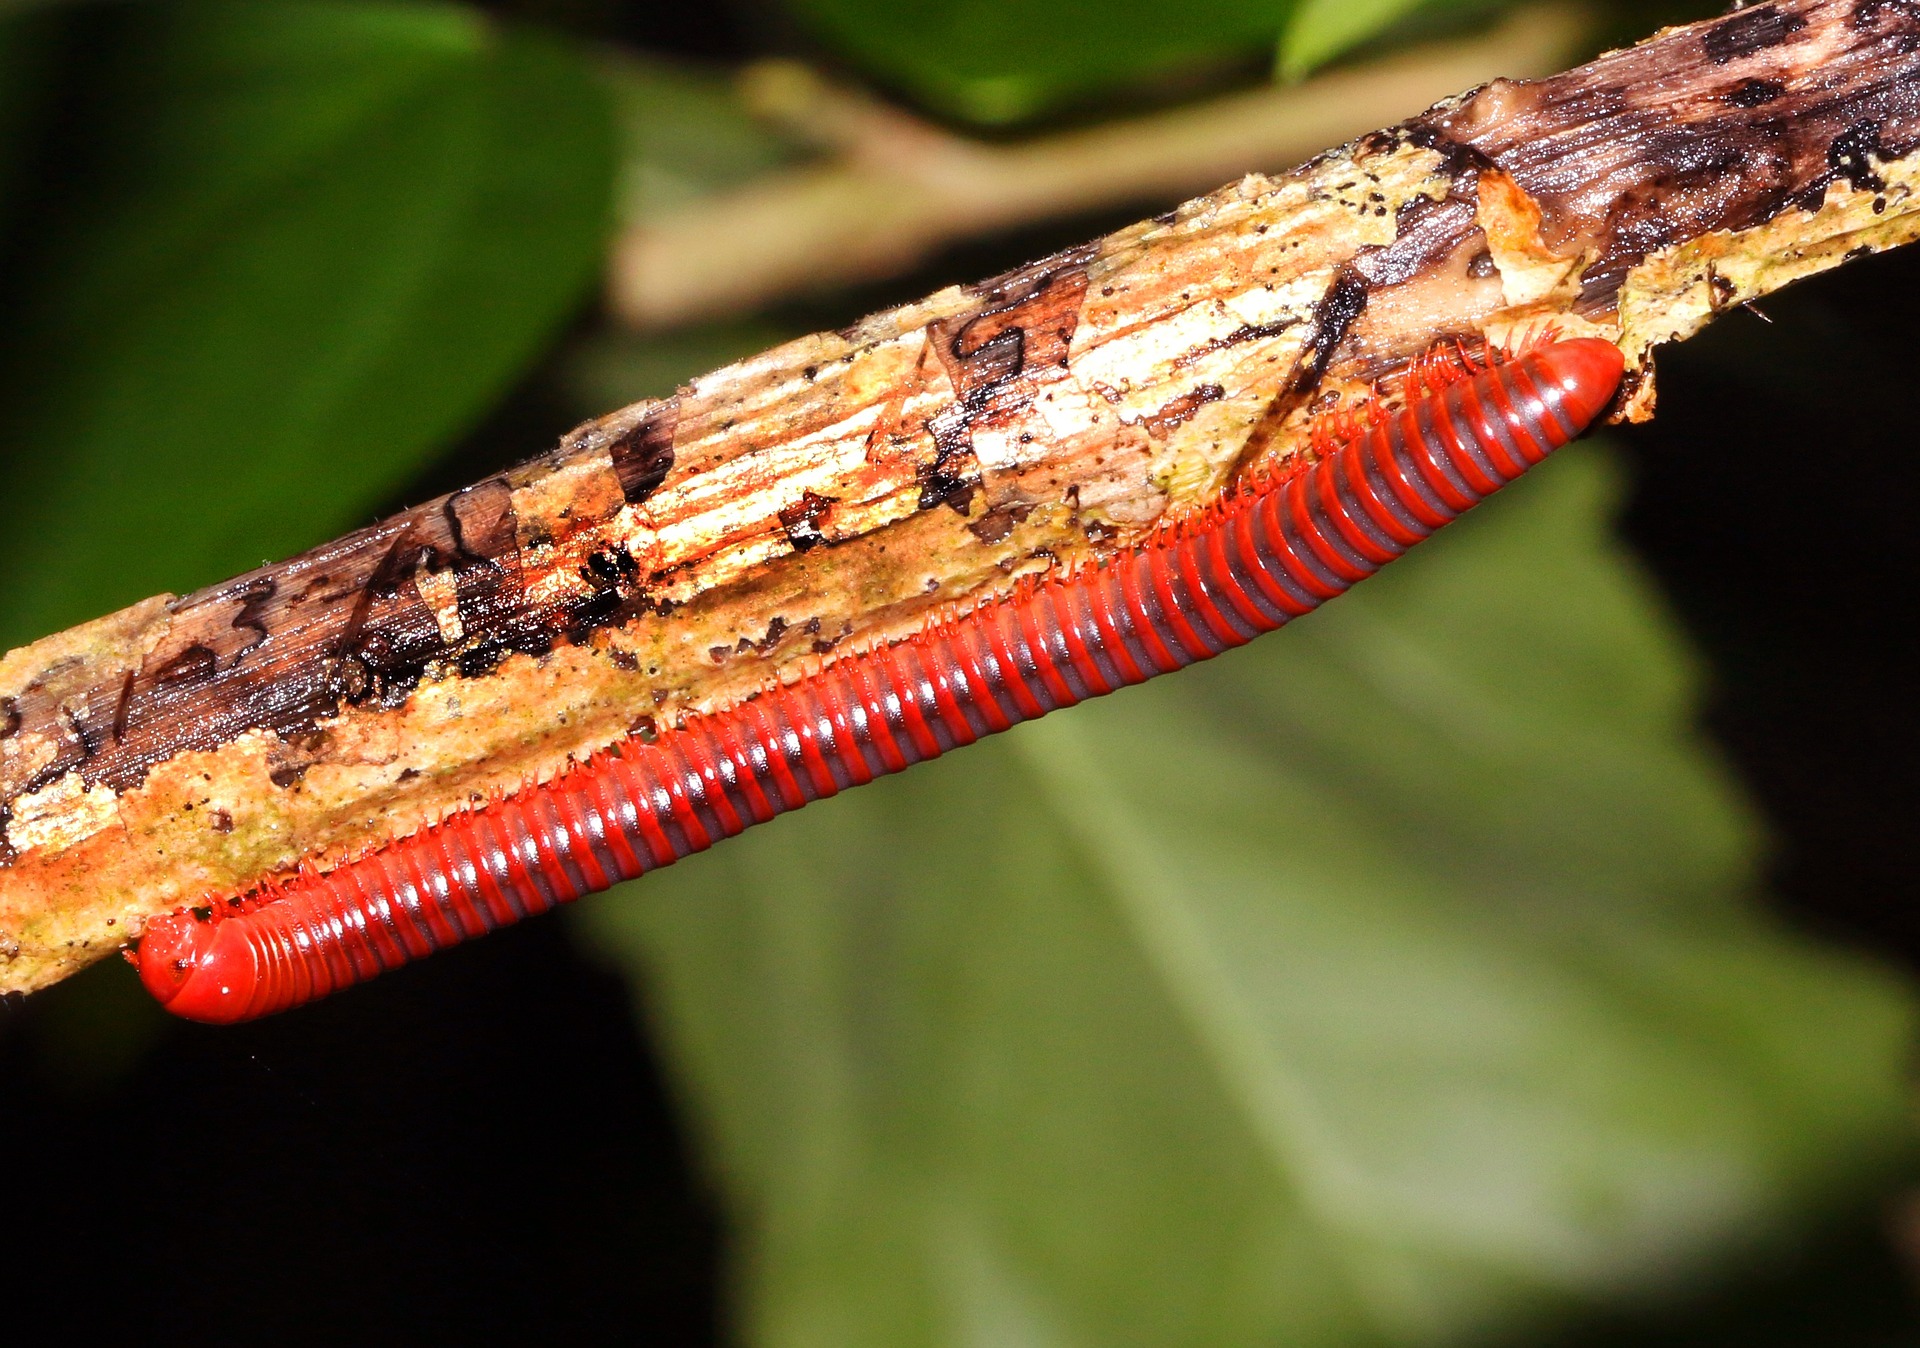 Bright red giant millipede crawling on wood.